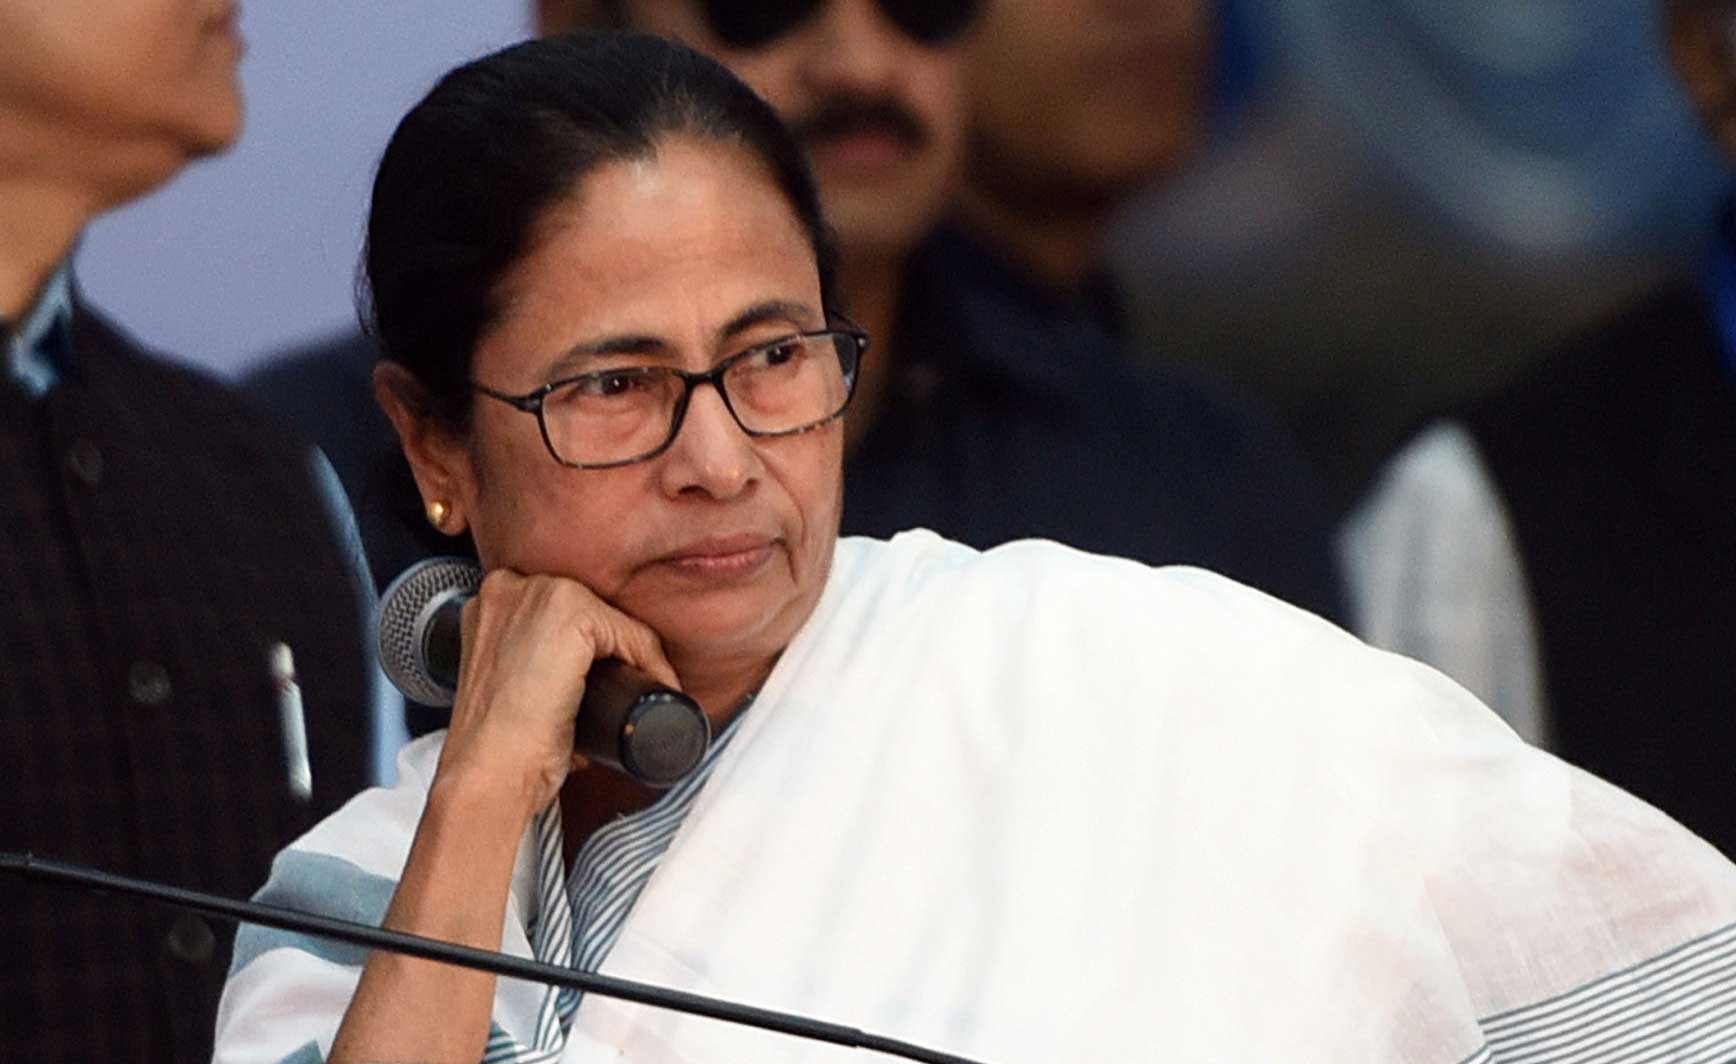 Unlike the saffron camp, the CPM or the Congress did not try to ascribe motives but echoed each other in accusing the Mamata Banerjee government of having failed to maintain law and order.
